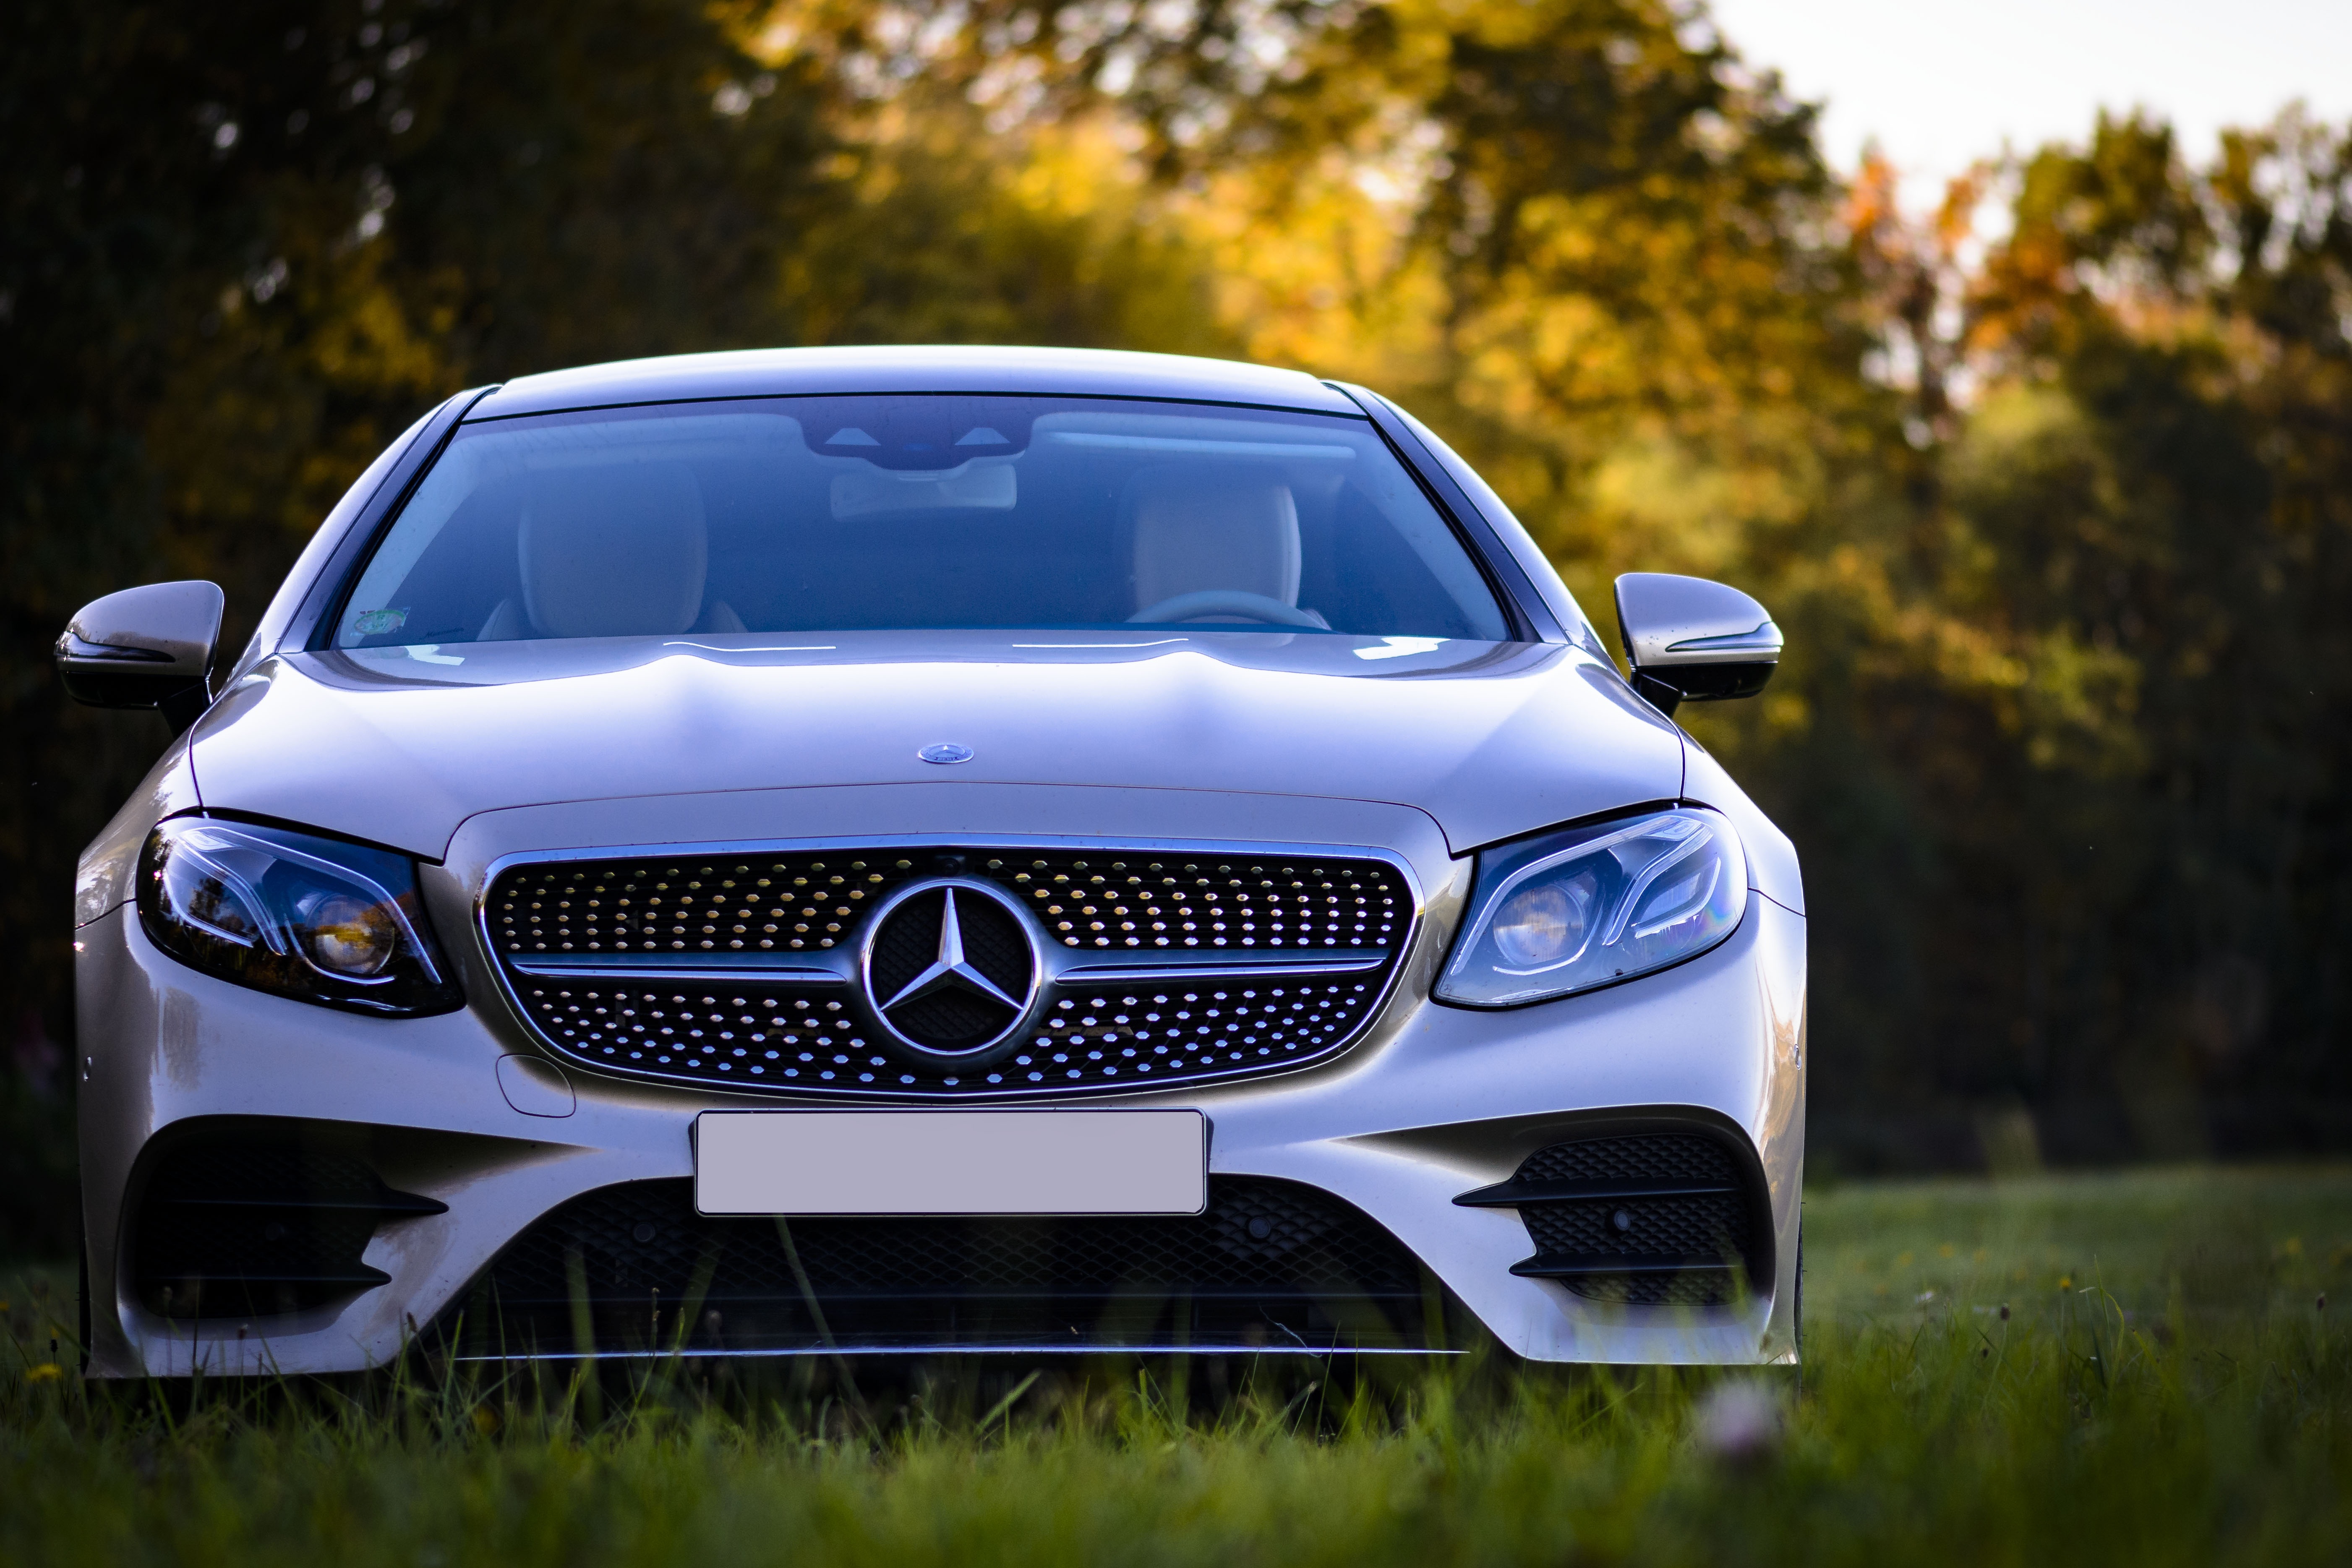 front view, mercedes-benz, cars, car, mercedes, modern, up to date, silver, silvery